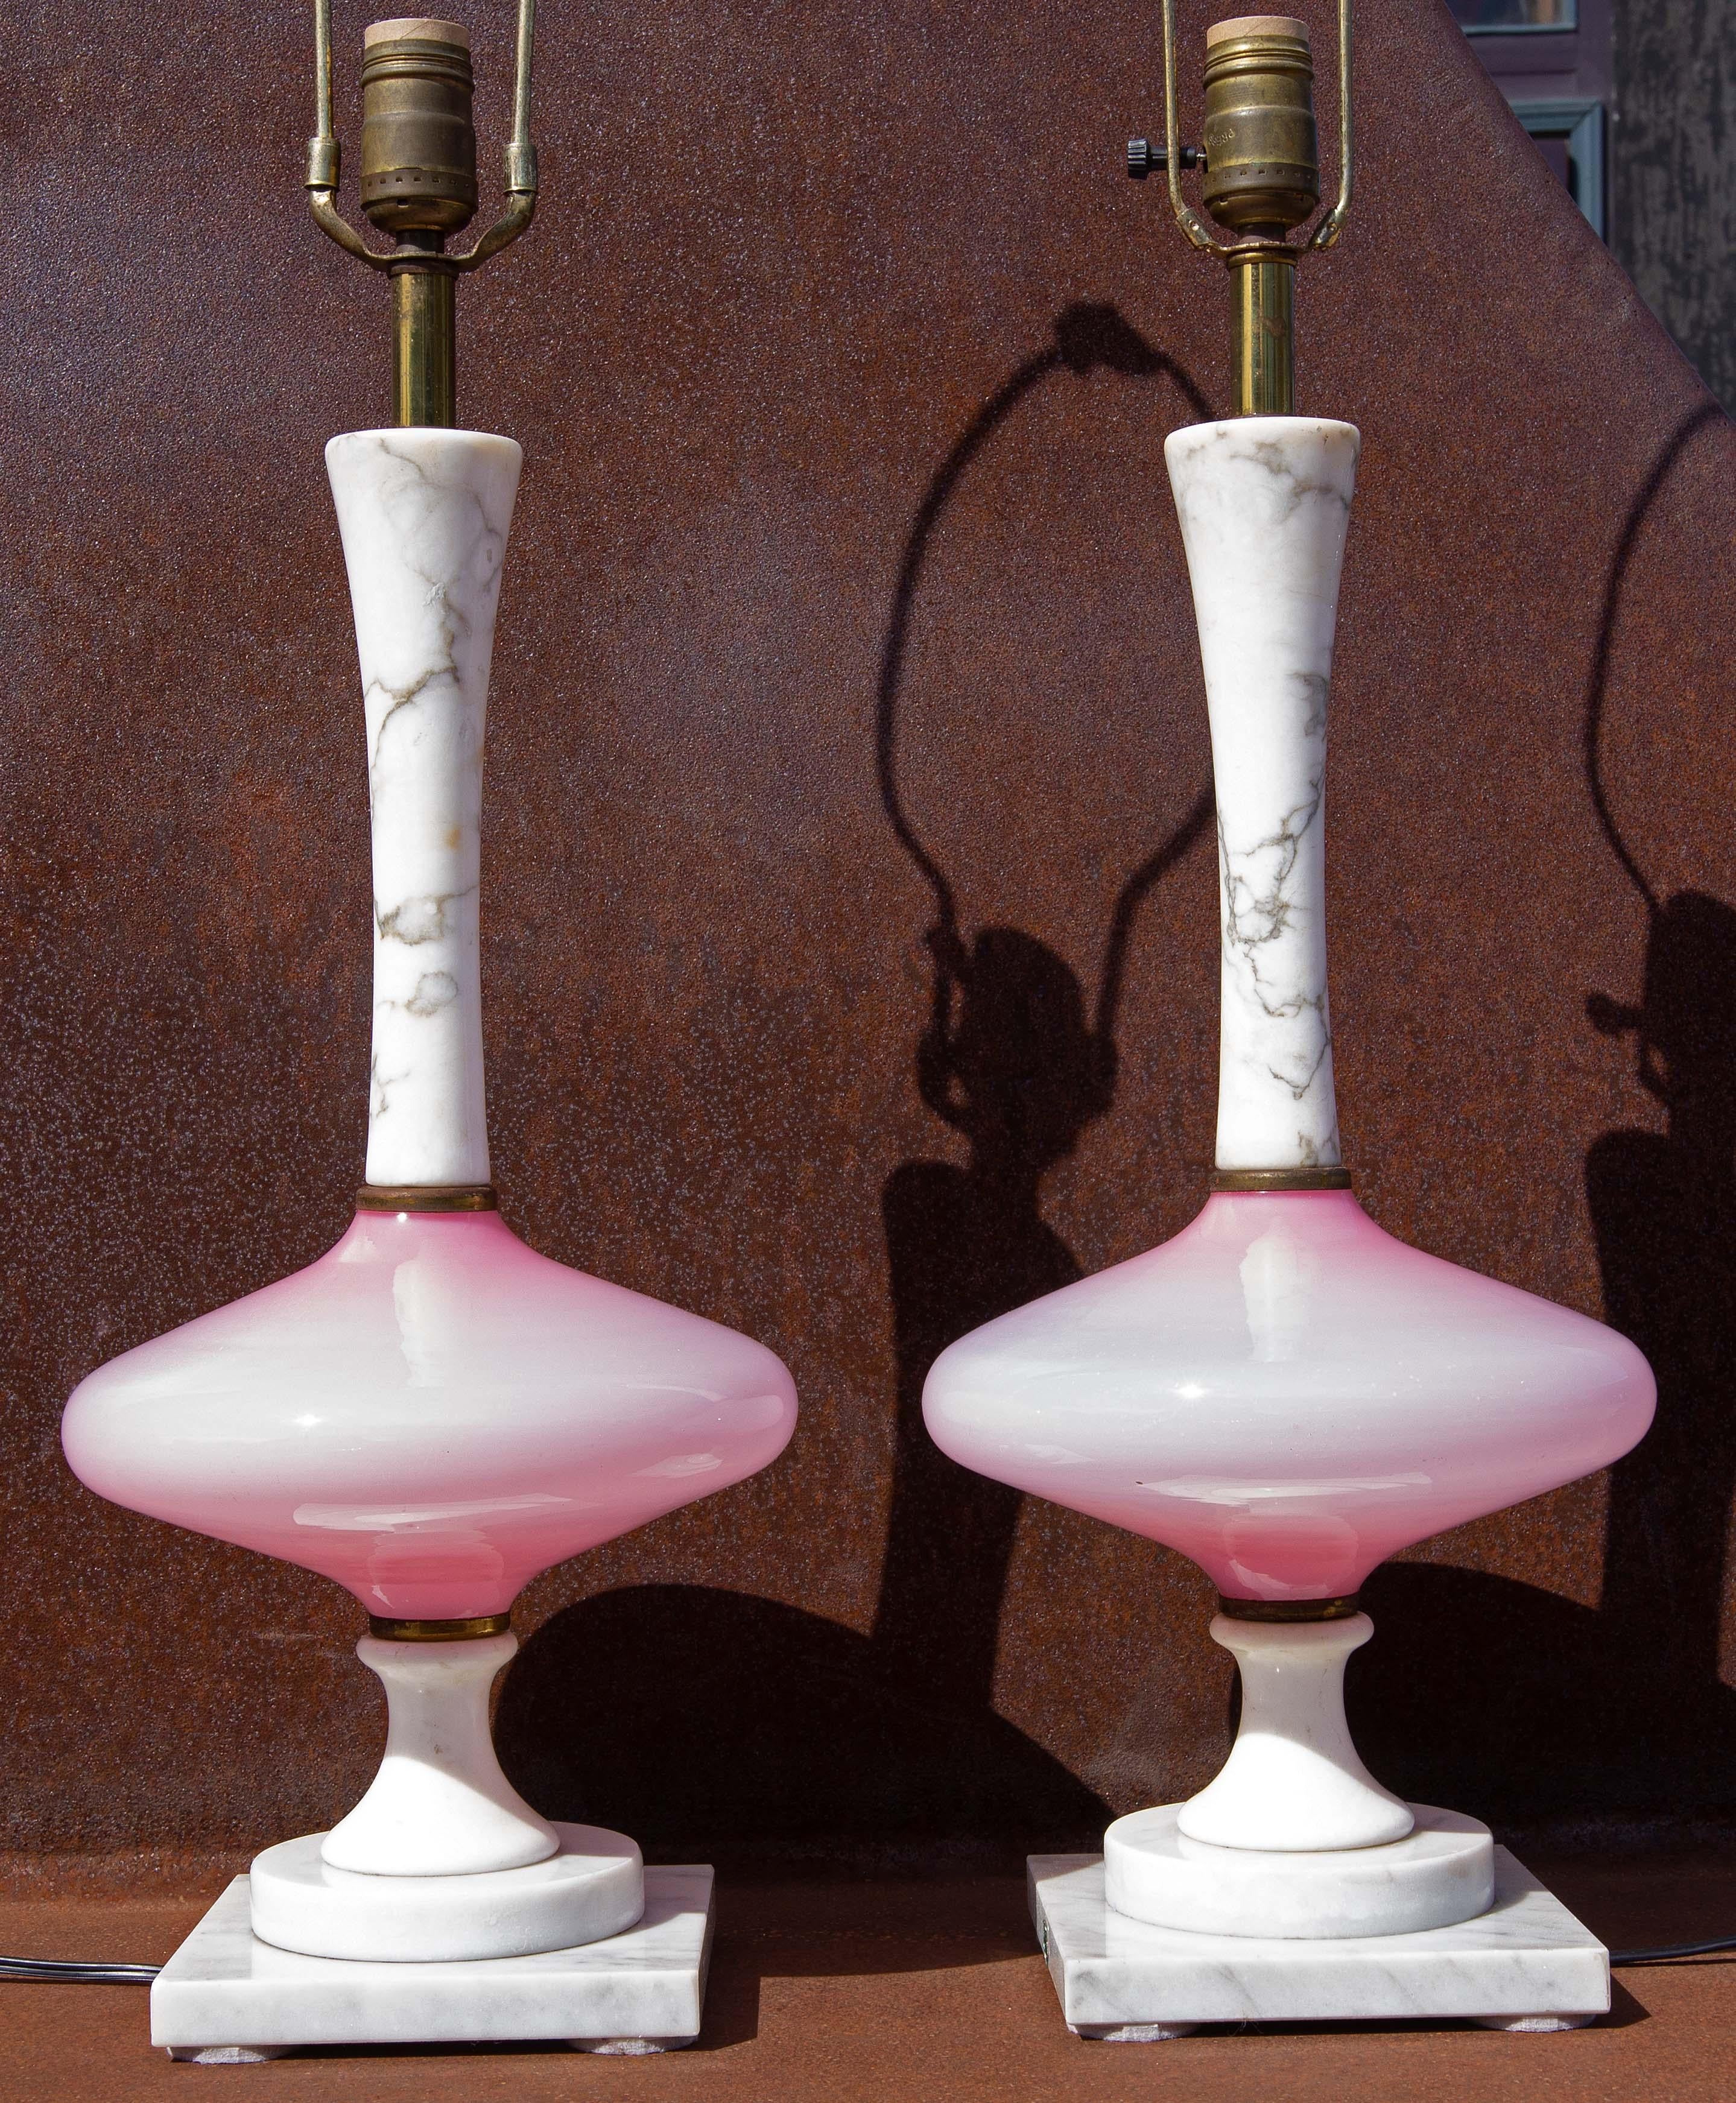 Pair of pink Murano glass and marble lamps. Very elegant form. Circa 1960's. Height to top of marble is 18.5